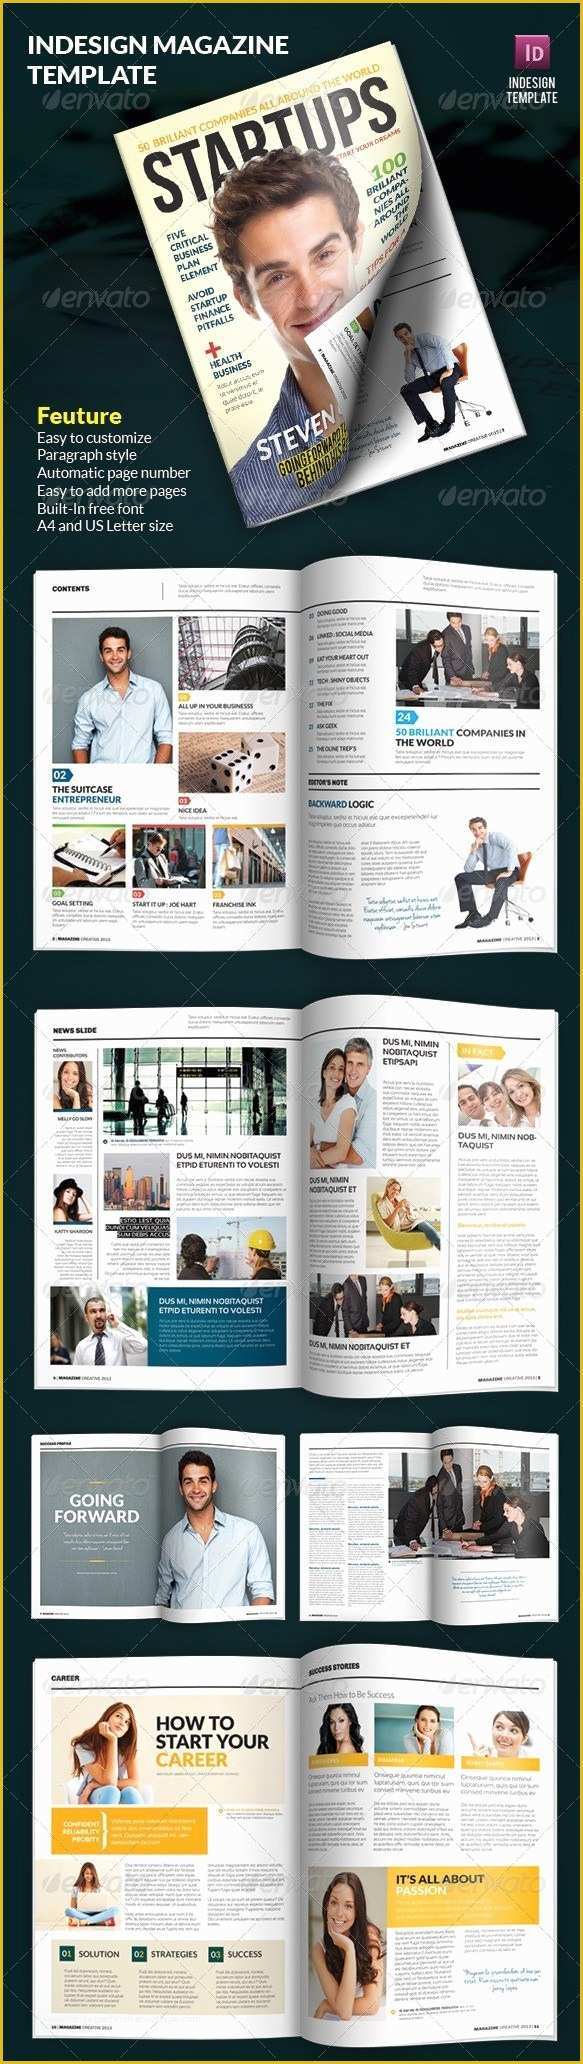 Magazine Template Indesign Free Of 55 Best Magazine Templates Shop Psd & Indesign